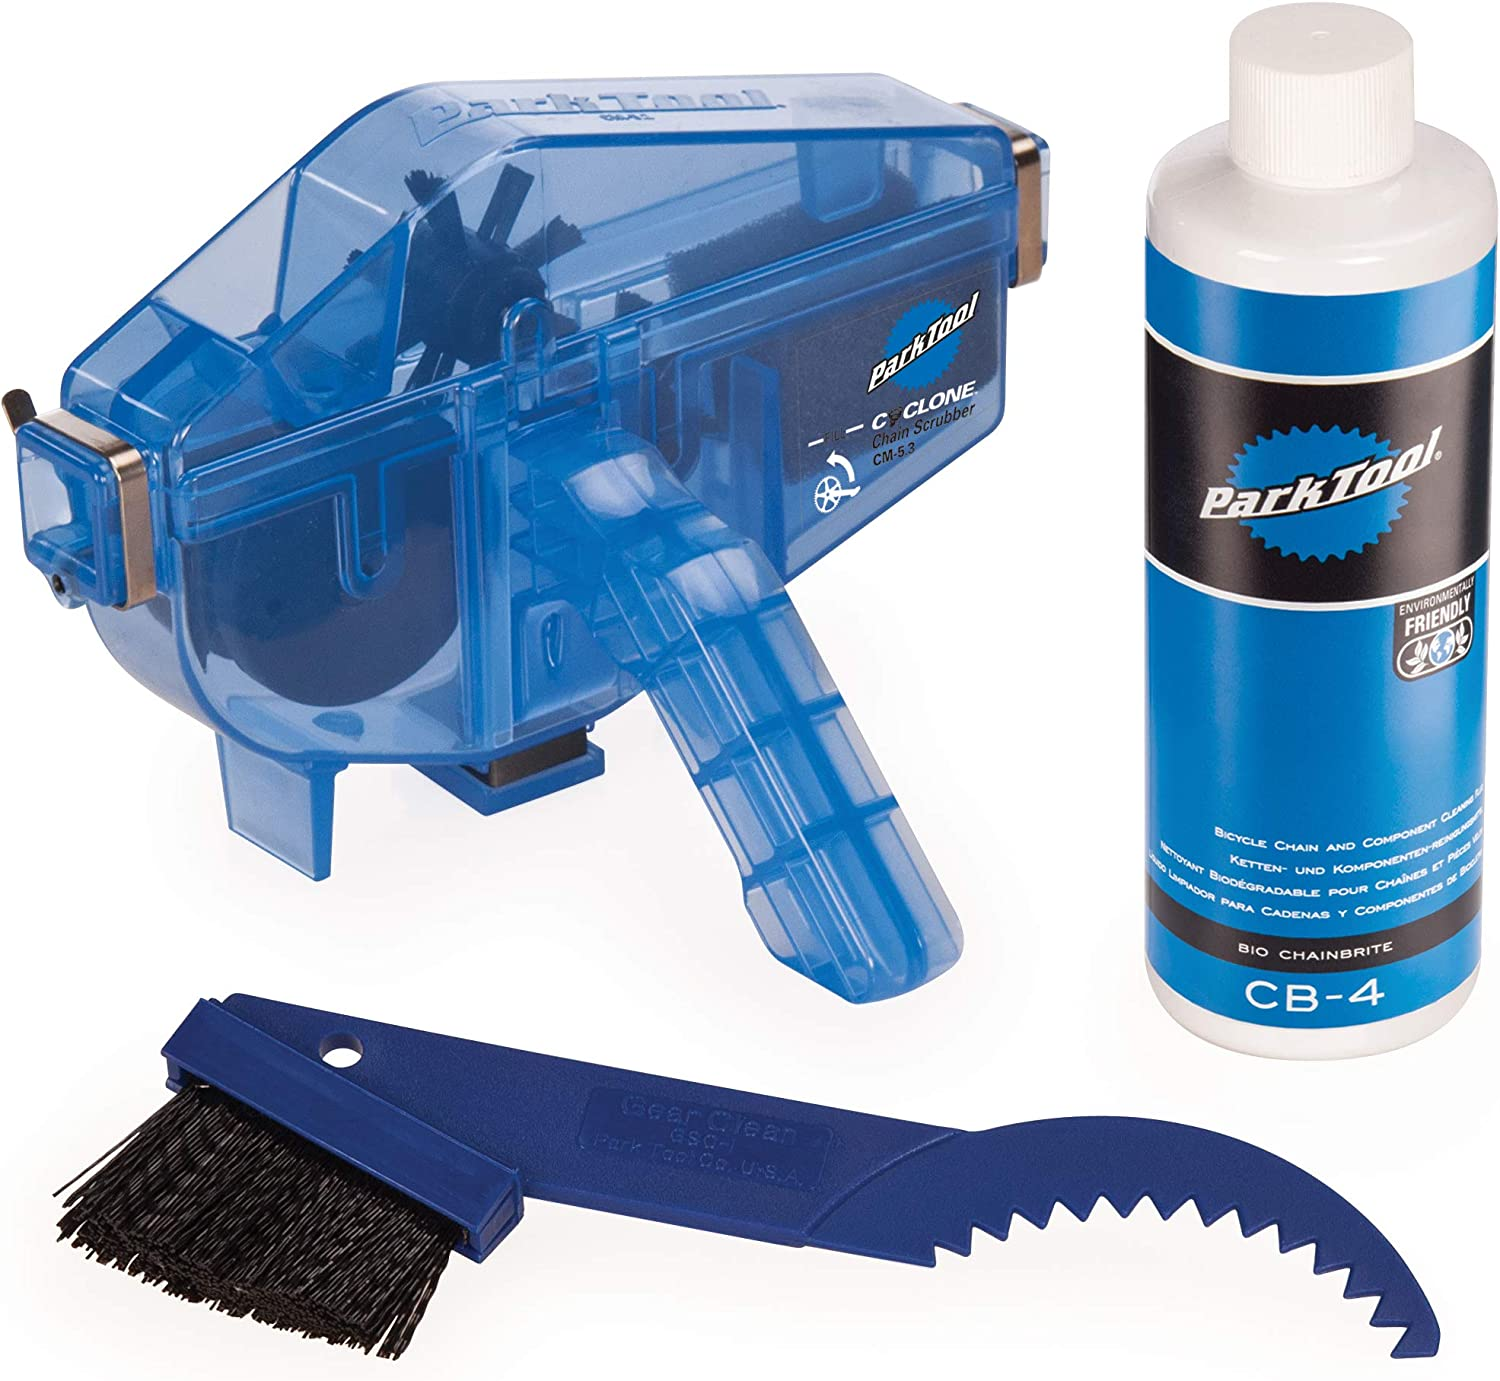 Clean your mountain bike chain and drivetrain with this cleaning kit, before applying lube.